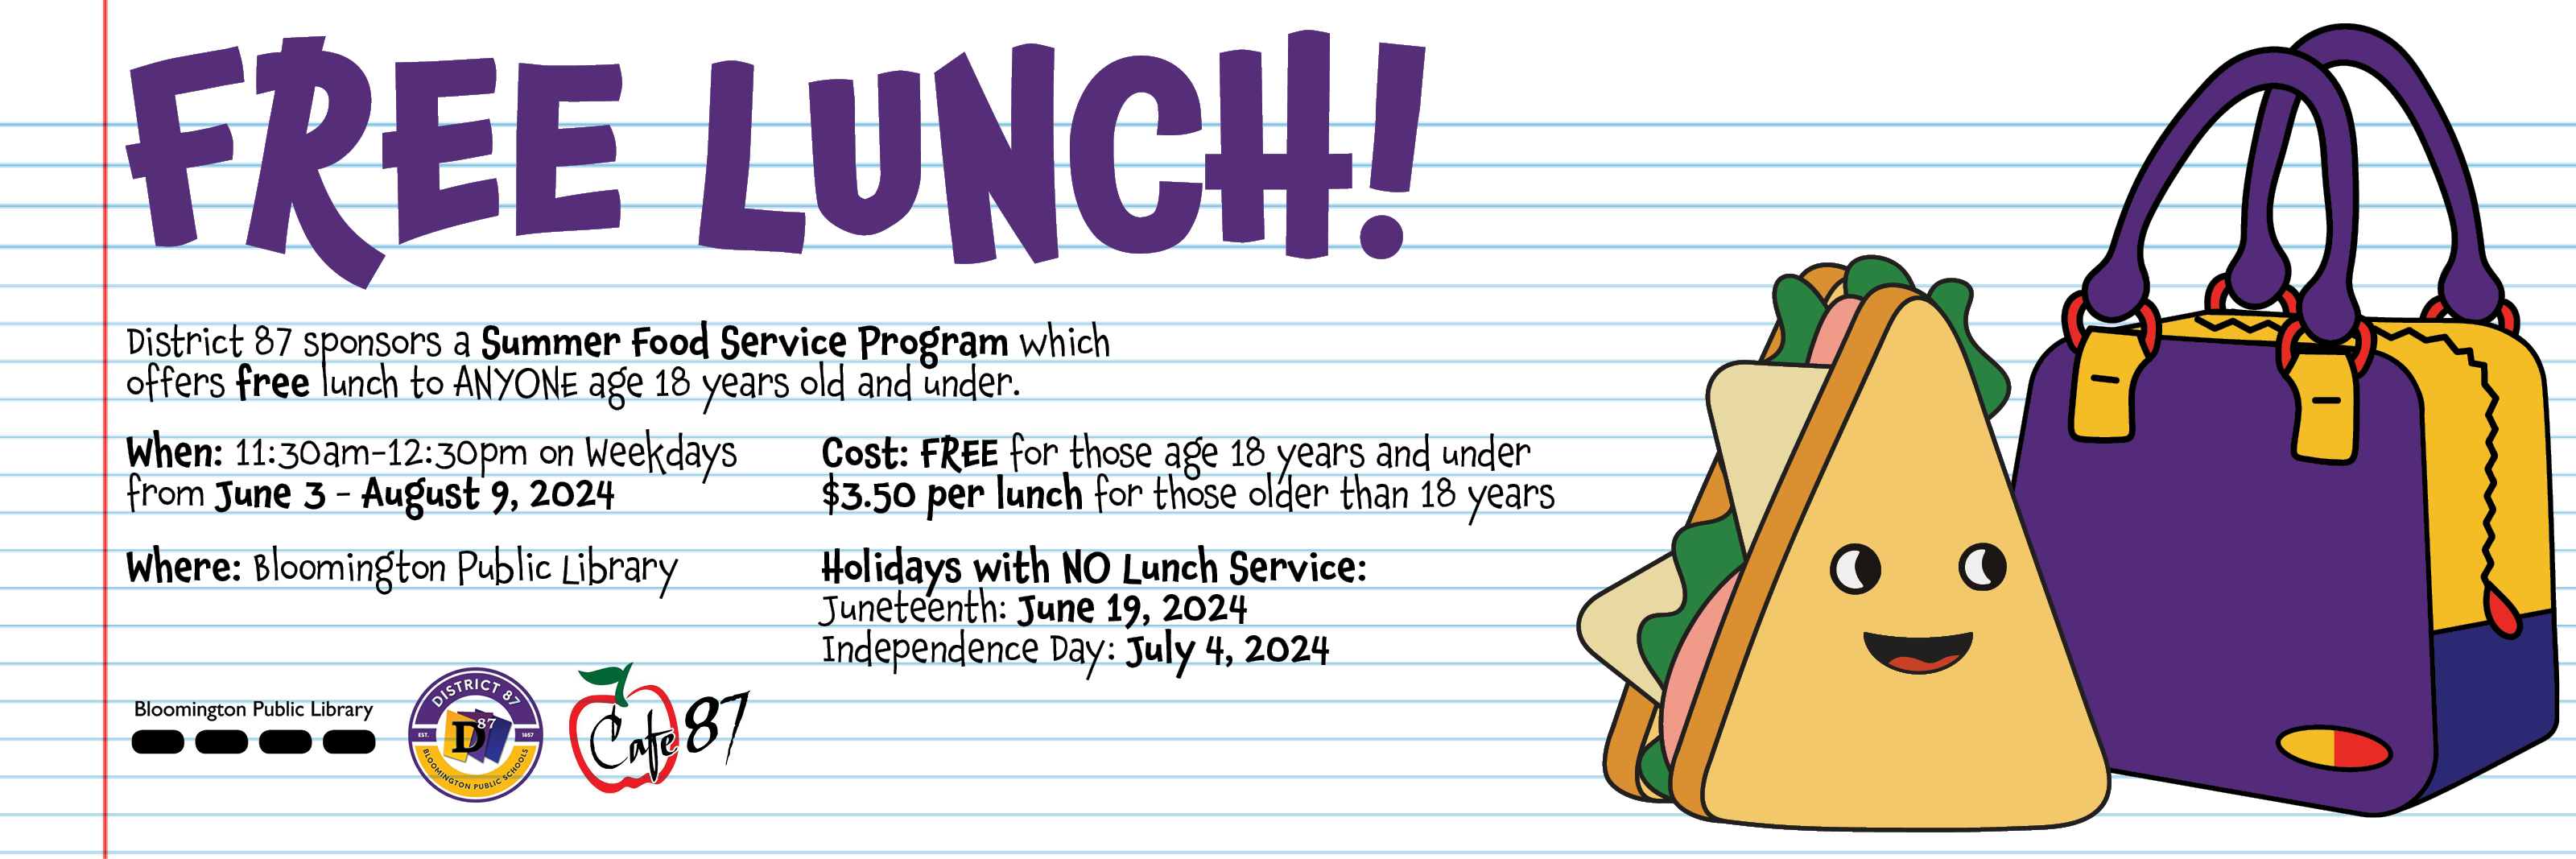 District 87 offers free summer lunches at Bloomington Library.